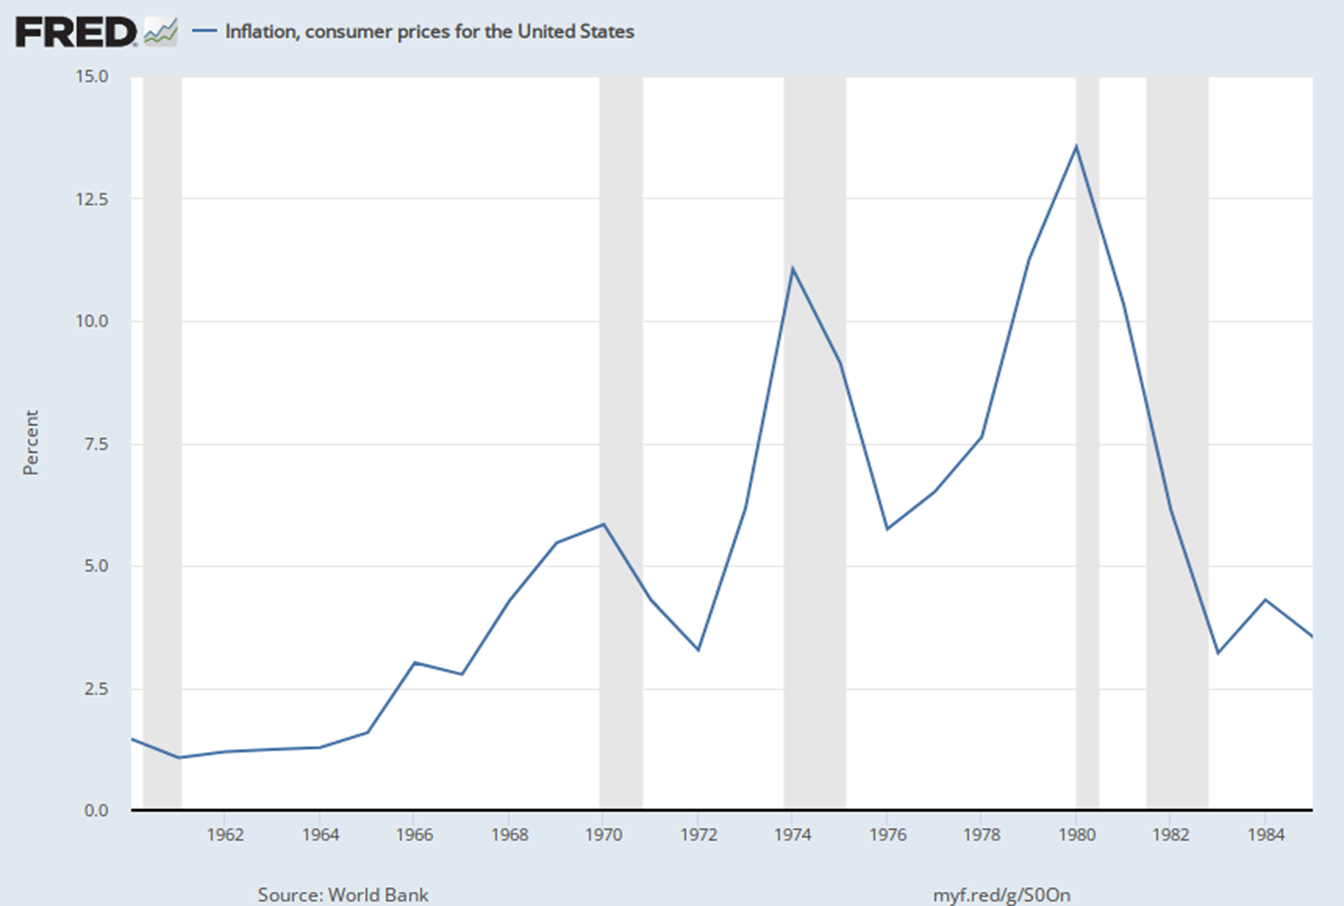 Chart showing inflation data from 1960 to 1985